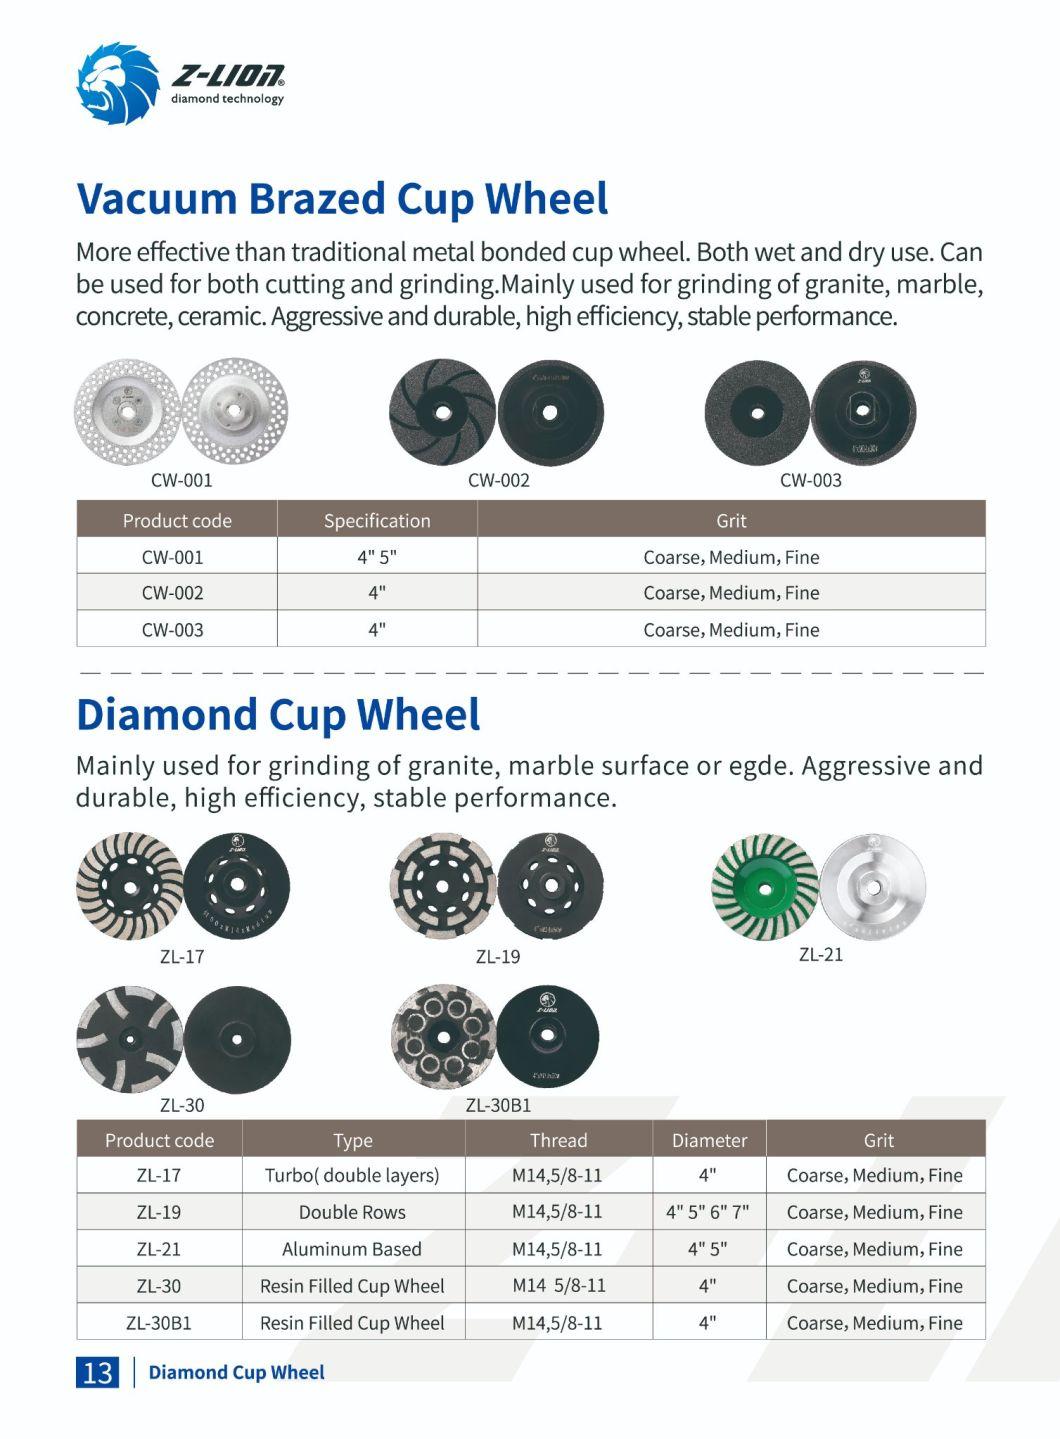 Super Quality Diamond Cup Wheel for Grinding Surface or Edge of Granite, Marble